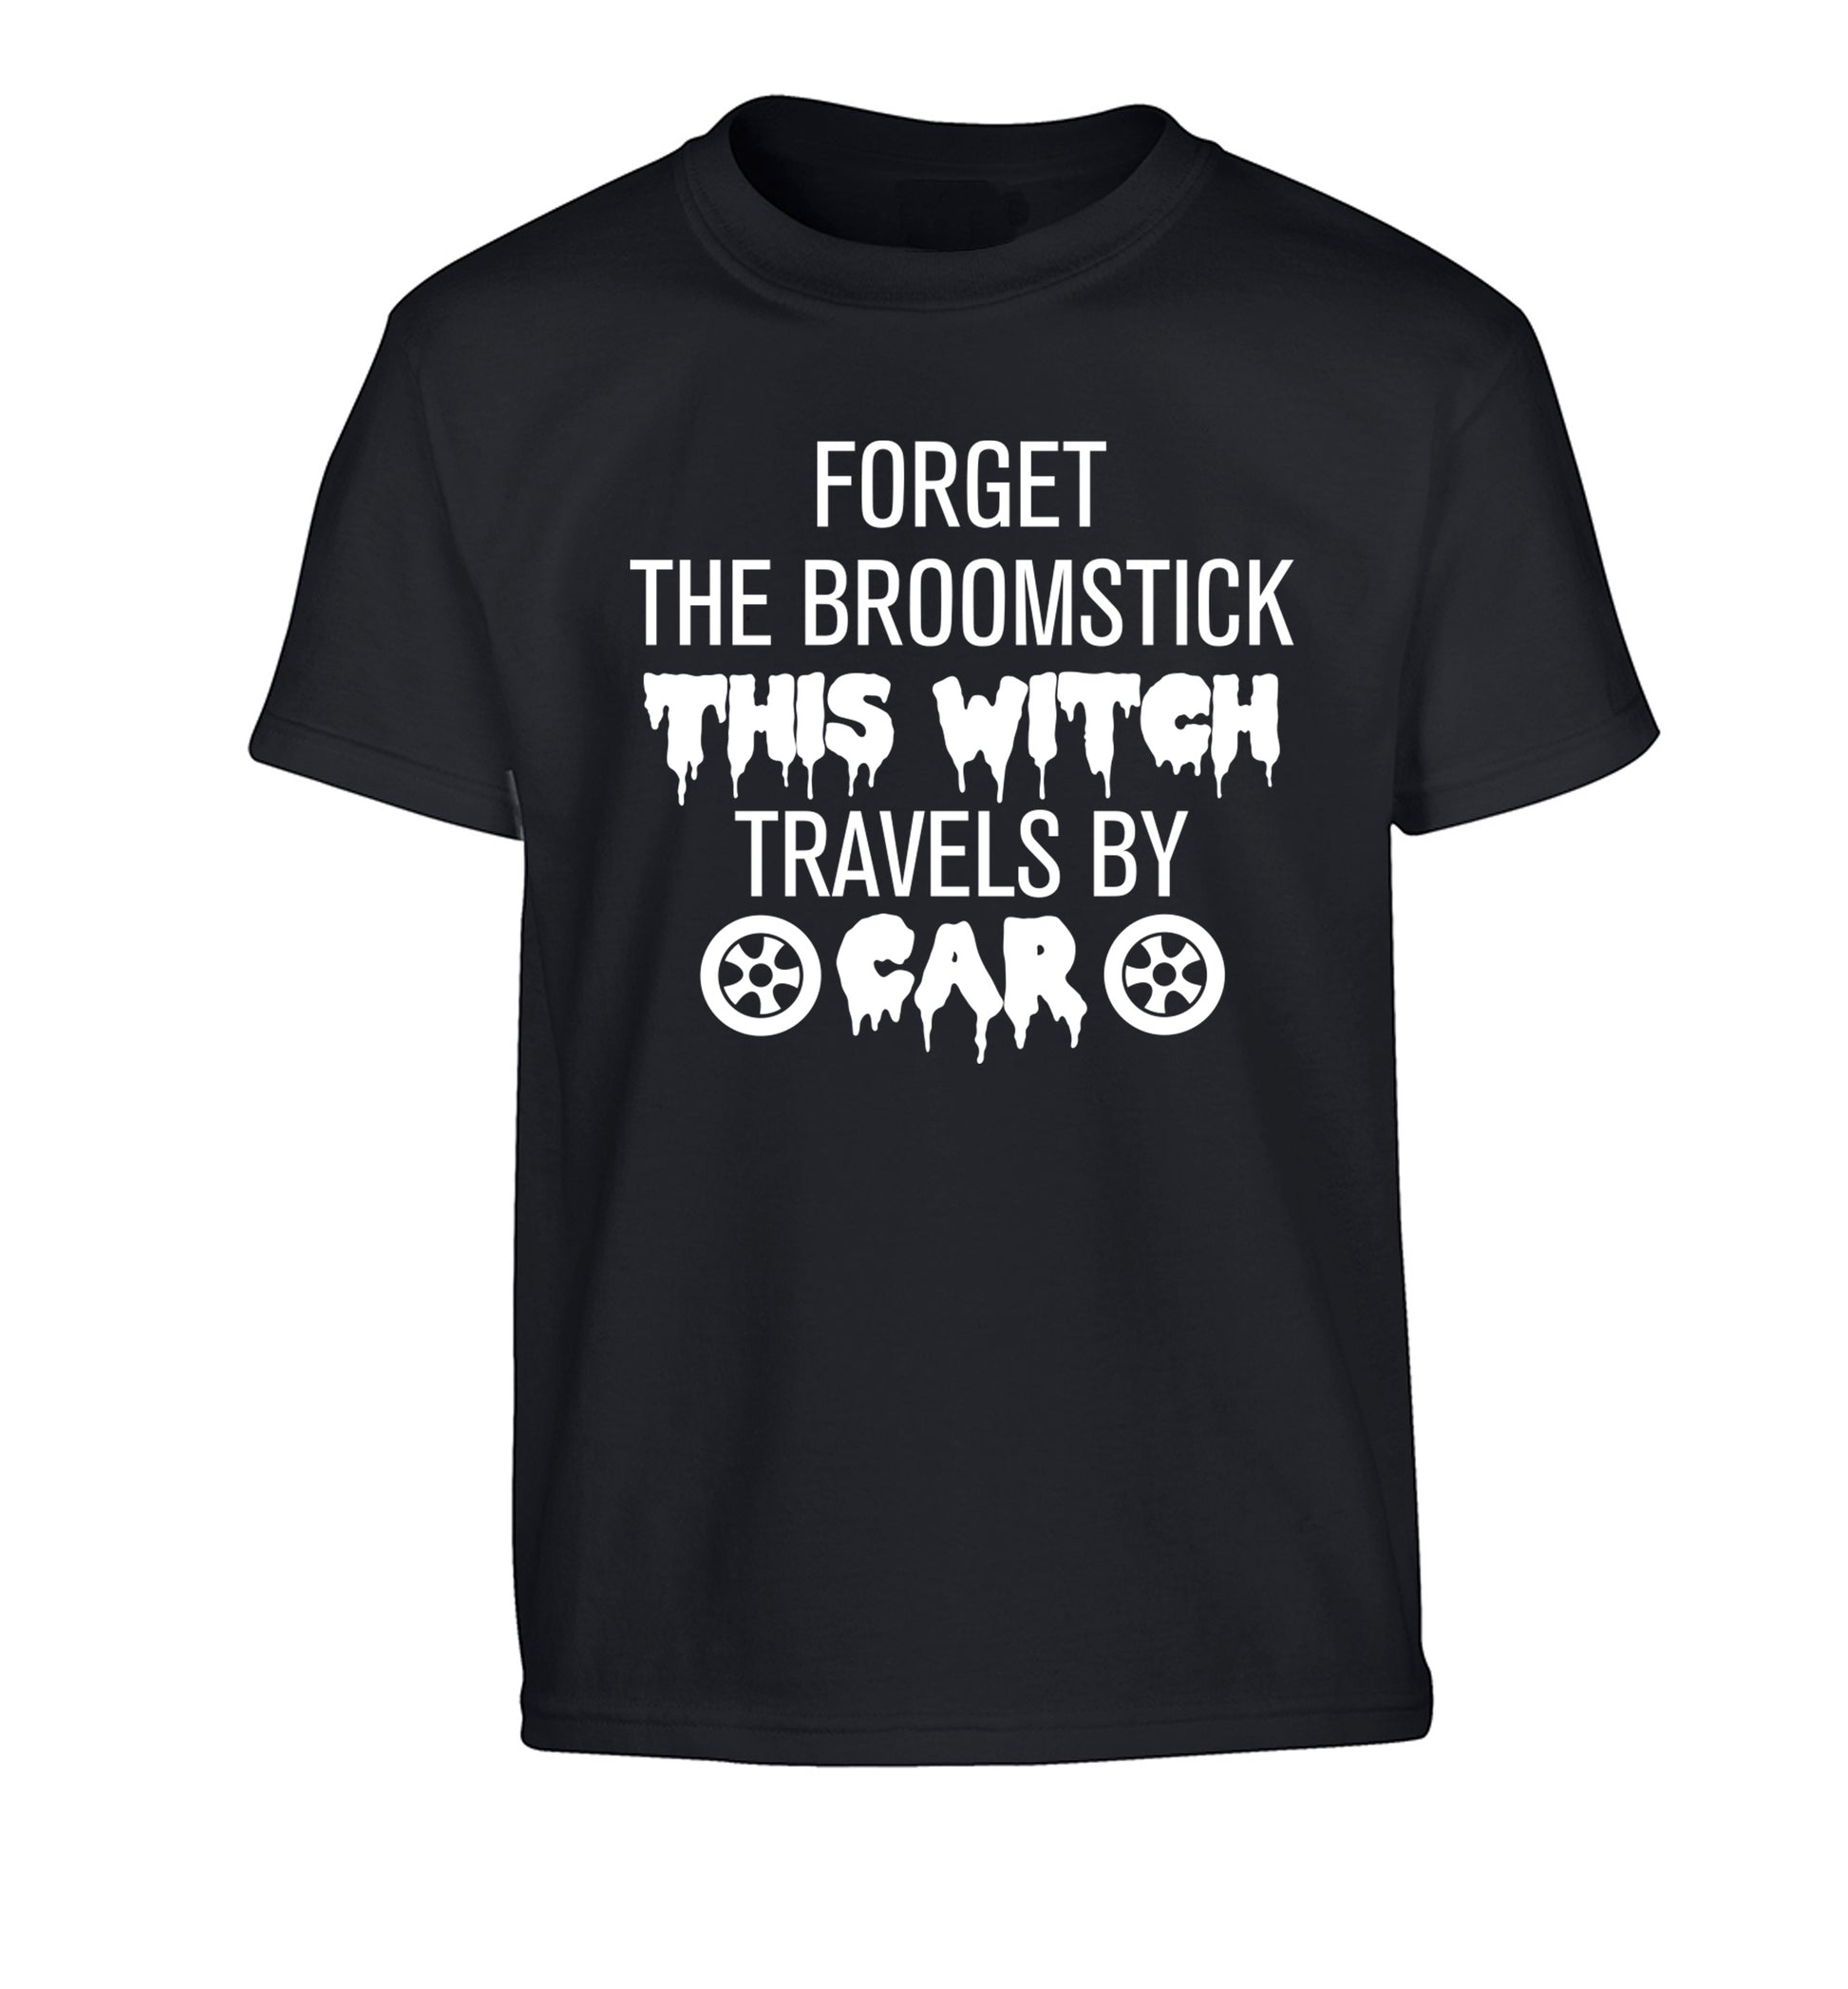 Forget the broomstick this witch travels by car Children's black Tshirt 12-14 Years